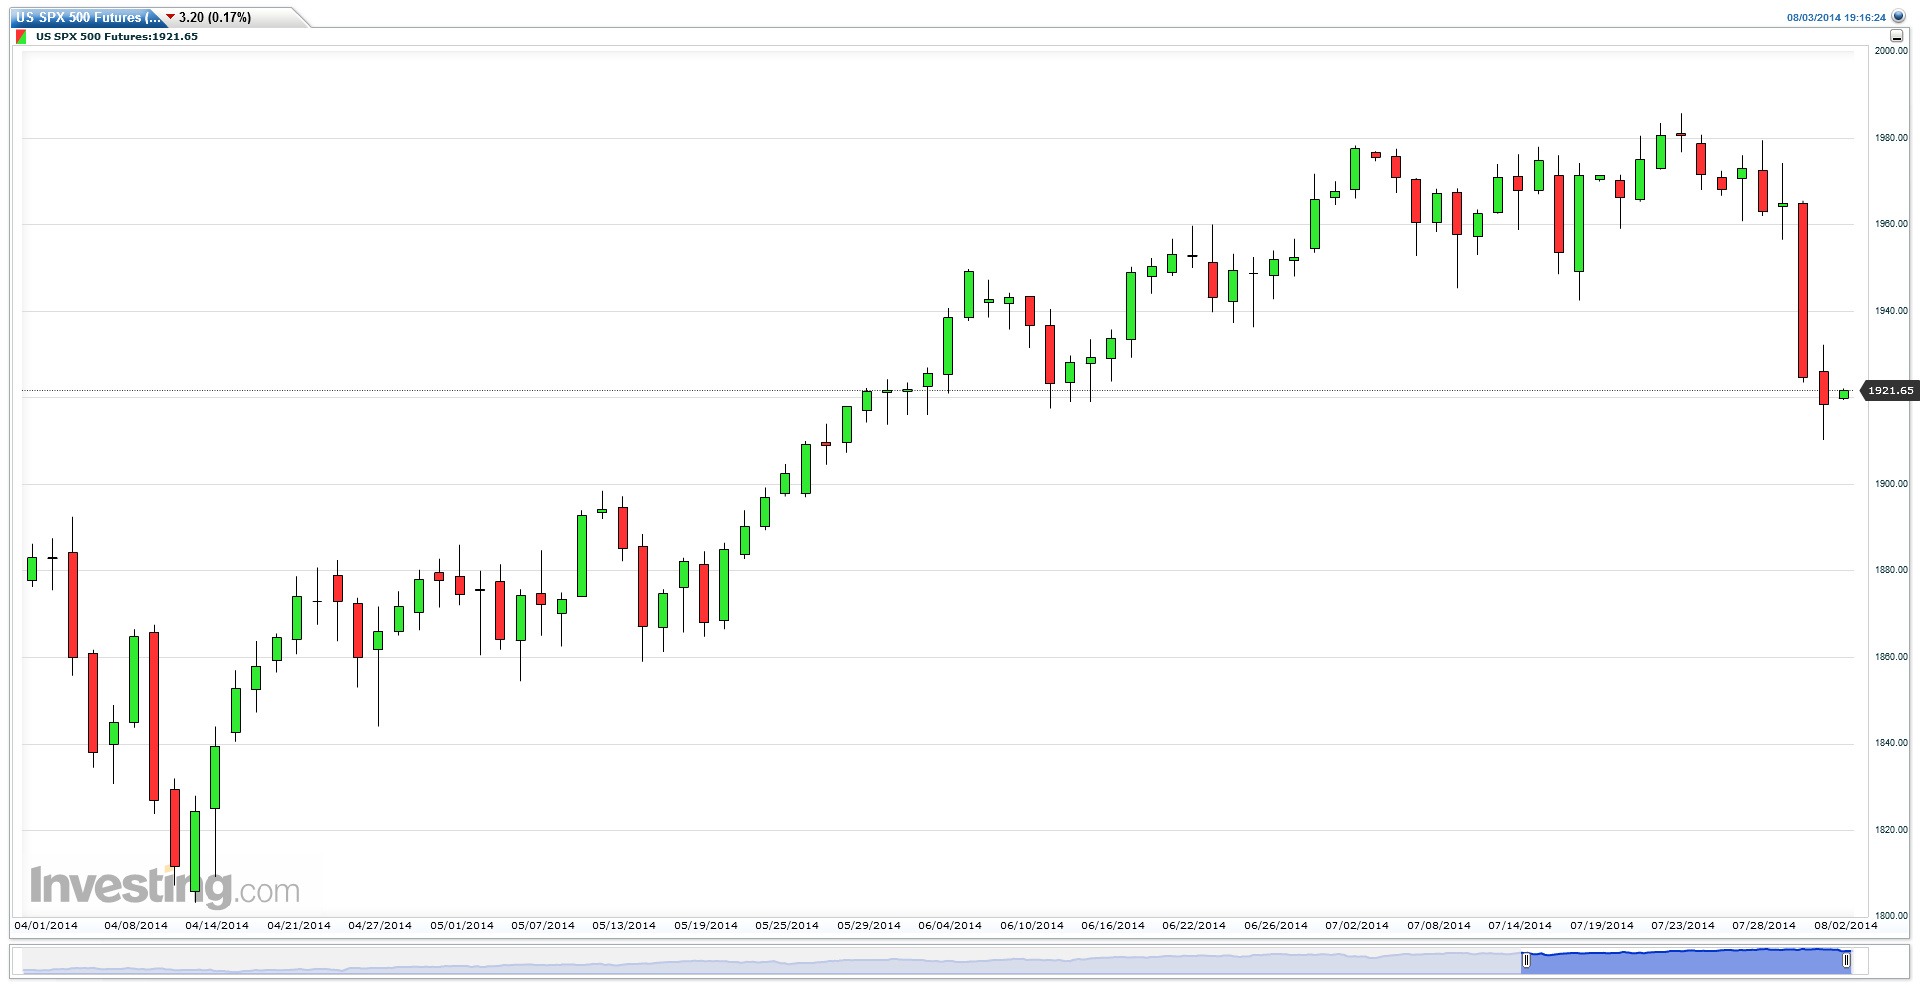 US SPX 500 Futures (Daily) for August 3, 2014